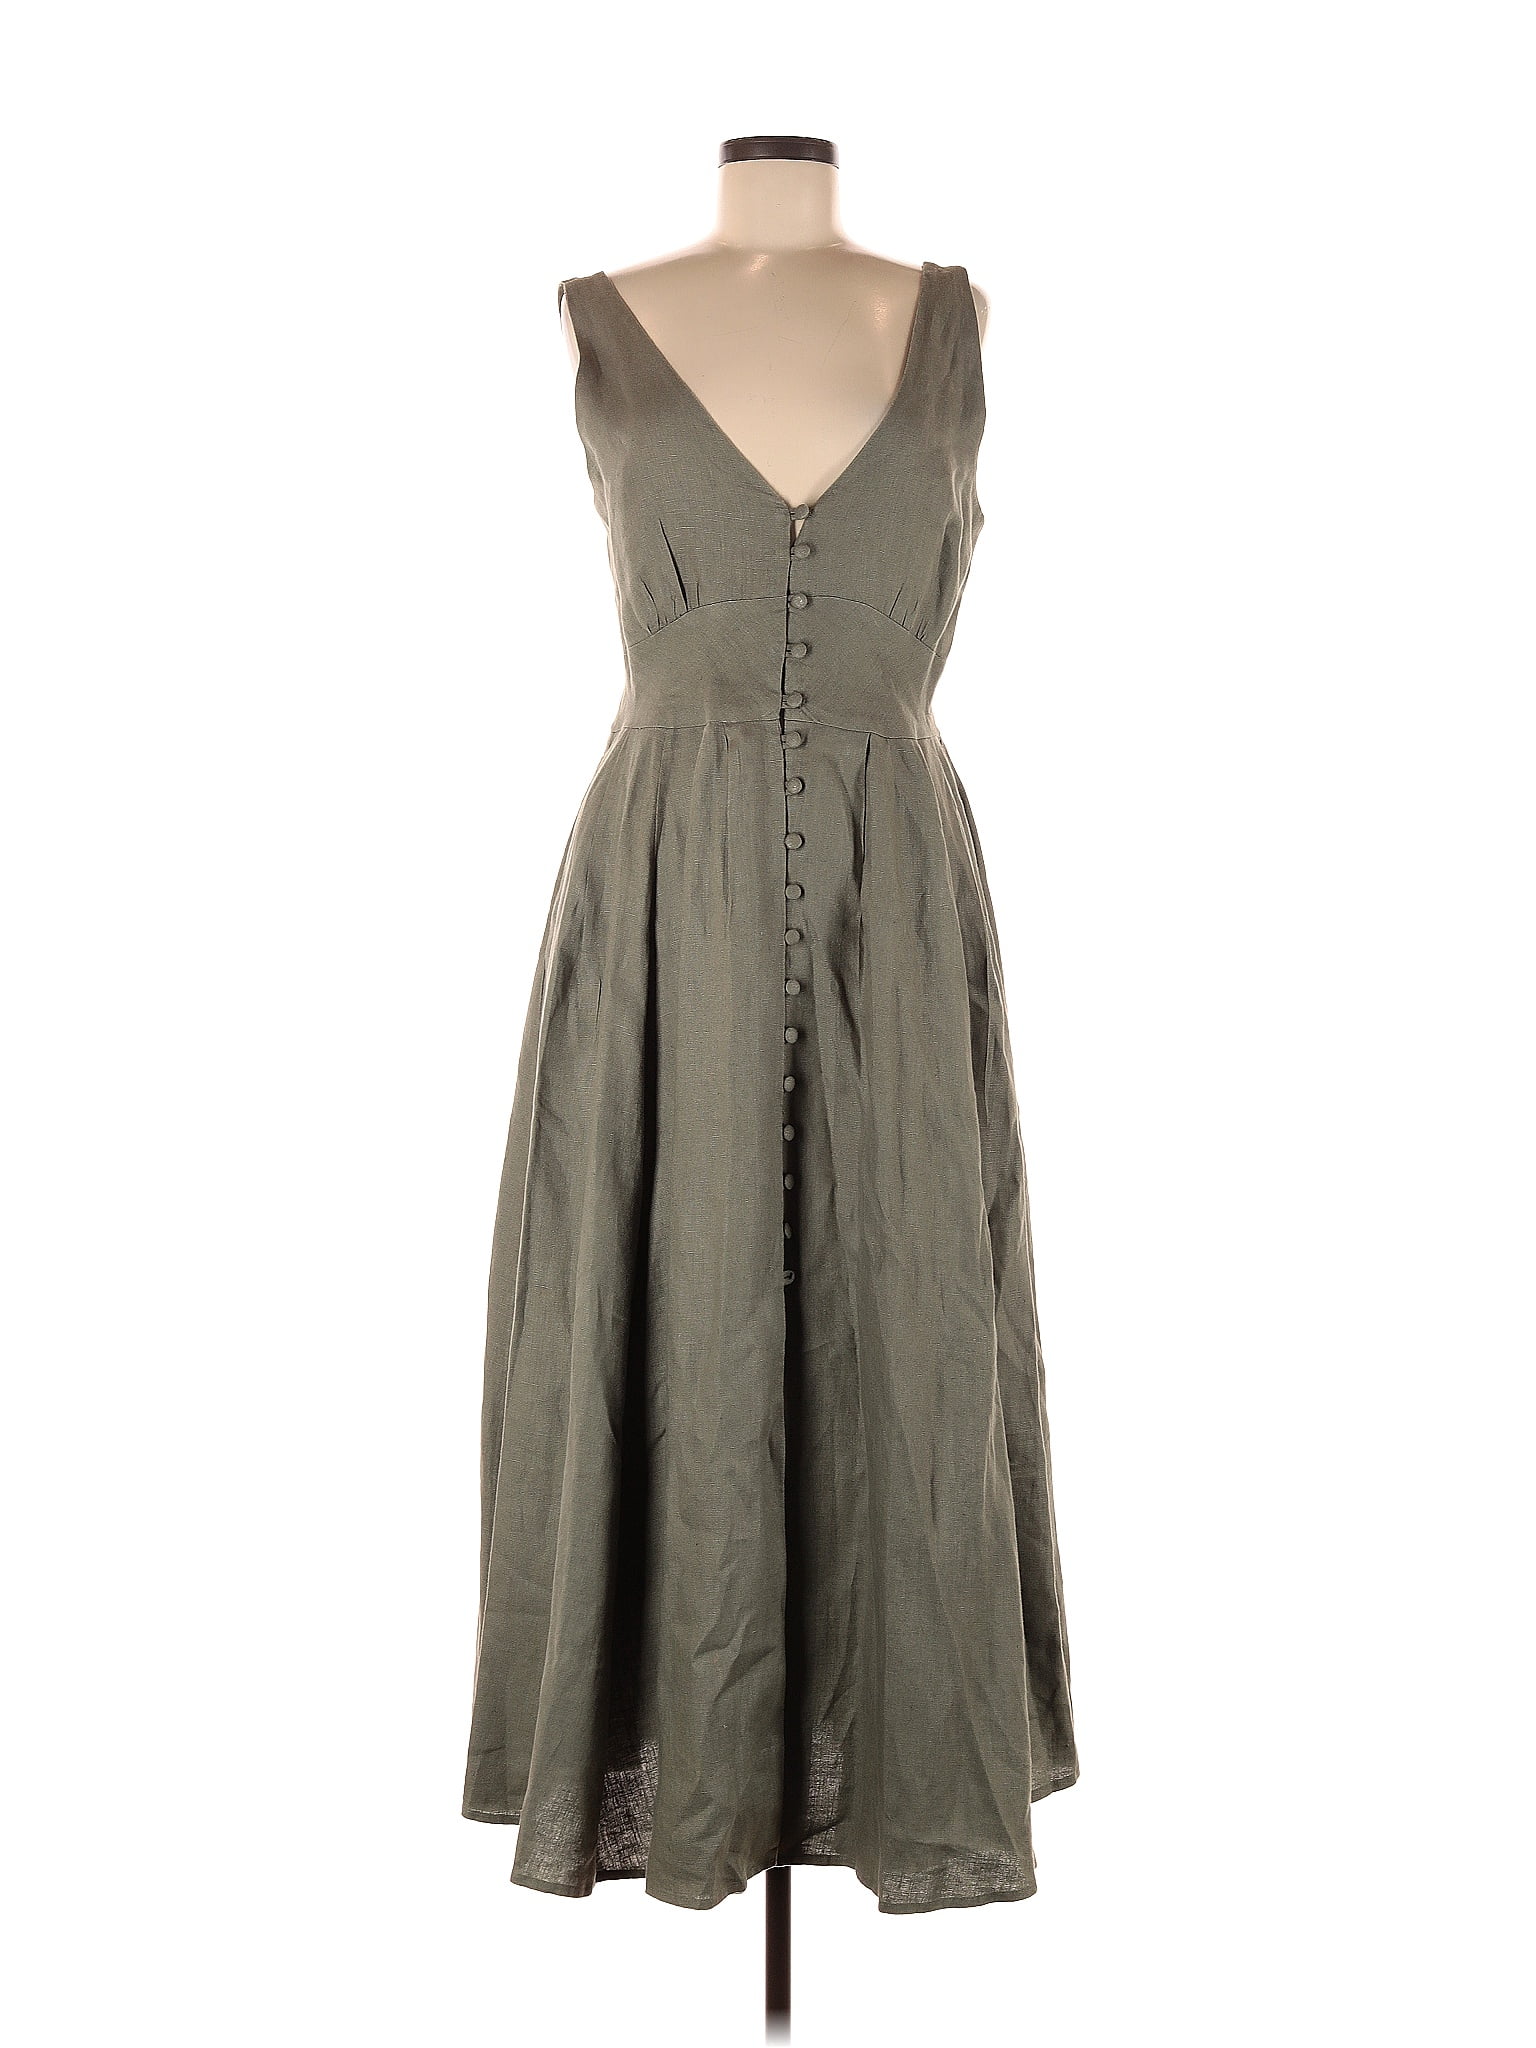 Cult Gaia 100% Linen Solid Green Gray Casual Dress Size M - 56% off ...